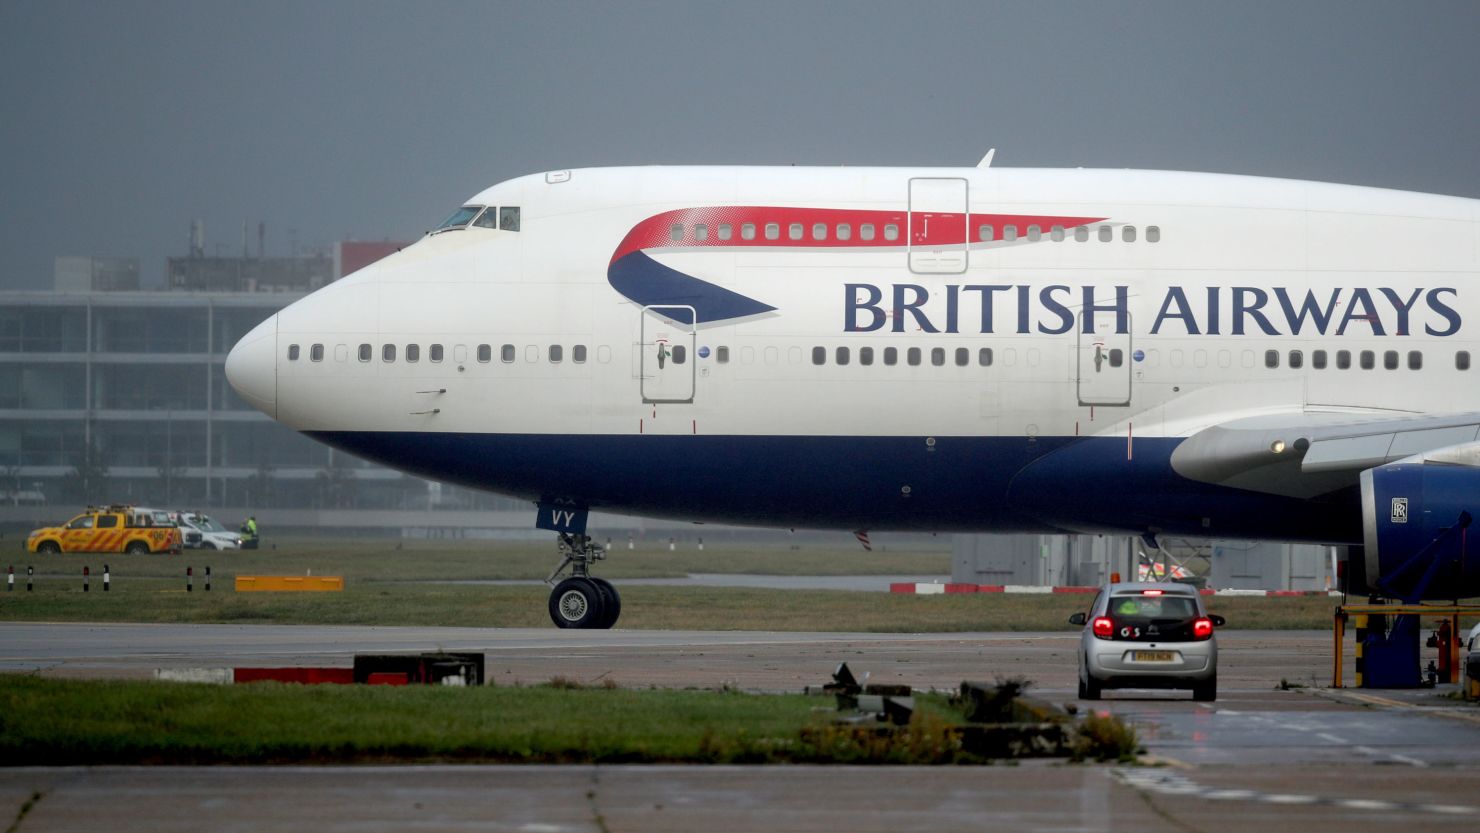 One of the last two British Airways Boeing 747-400 aircraft prepares for its final flight from Heathrow Airport.